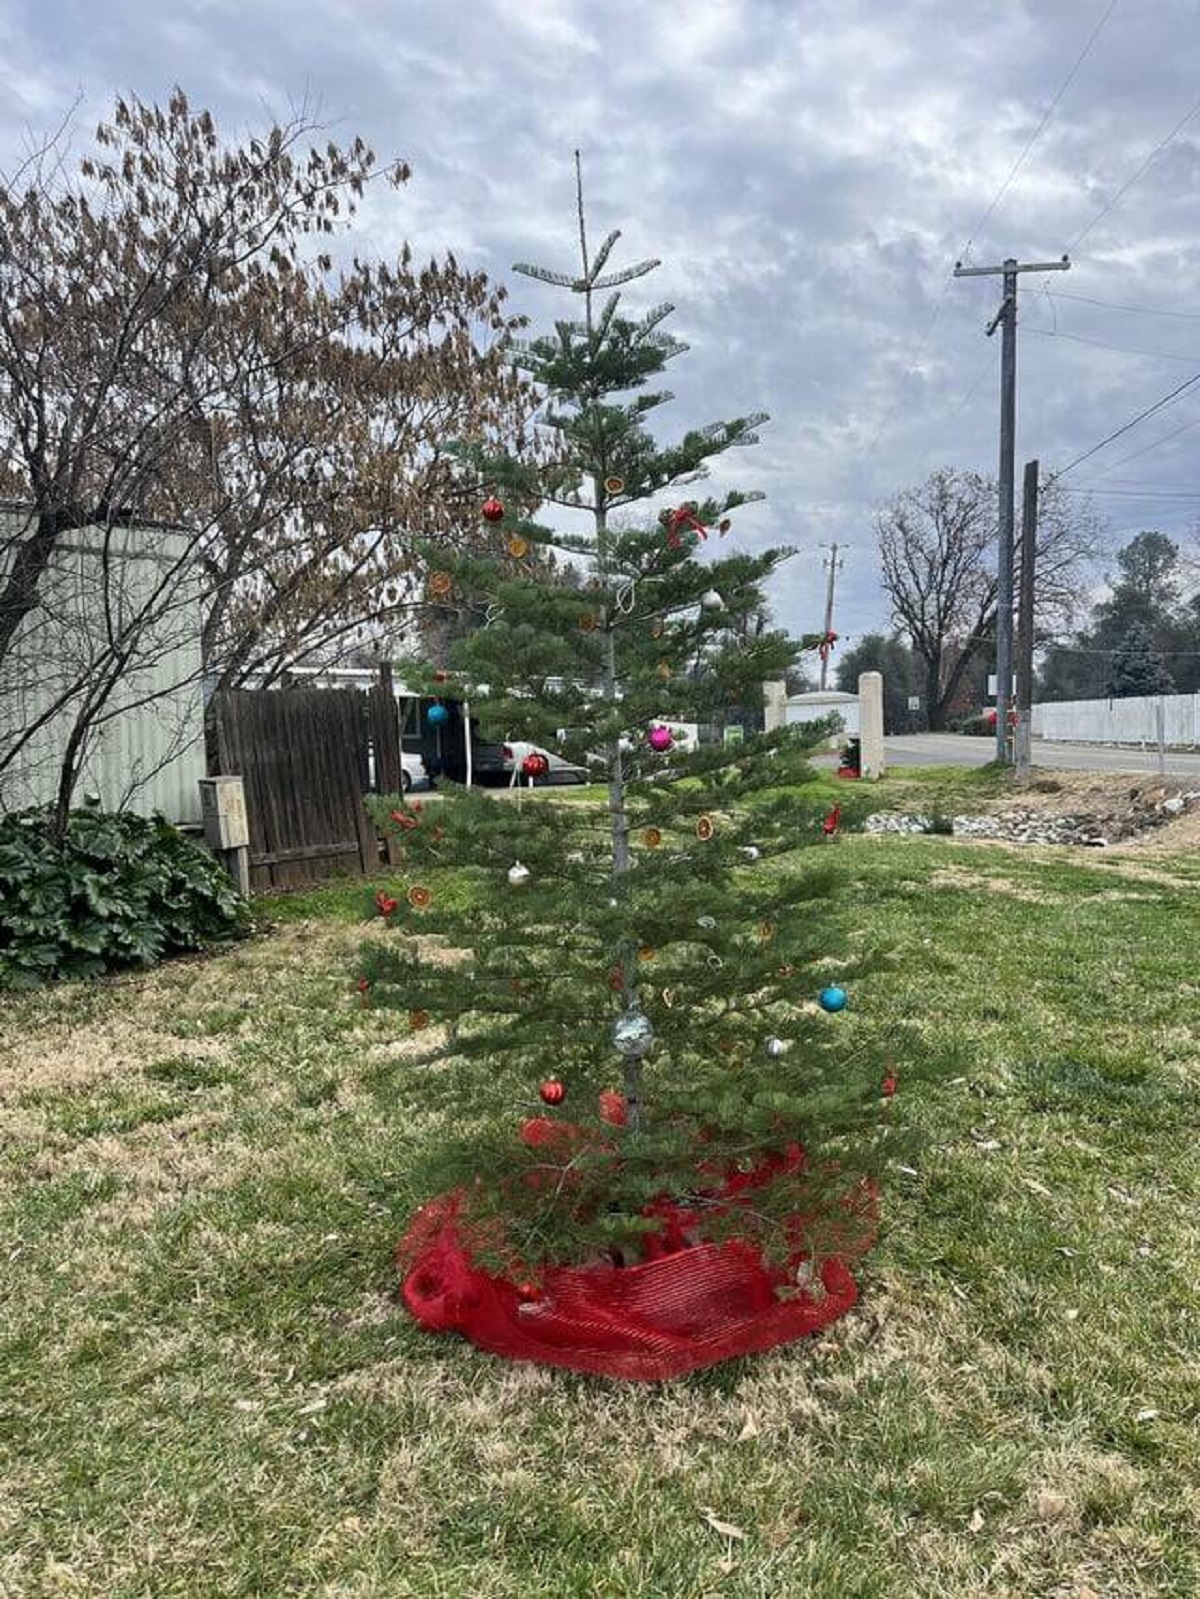 "Surprised a mobile home park with a 10ft Christmas tree and it was stolen the next day"